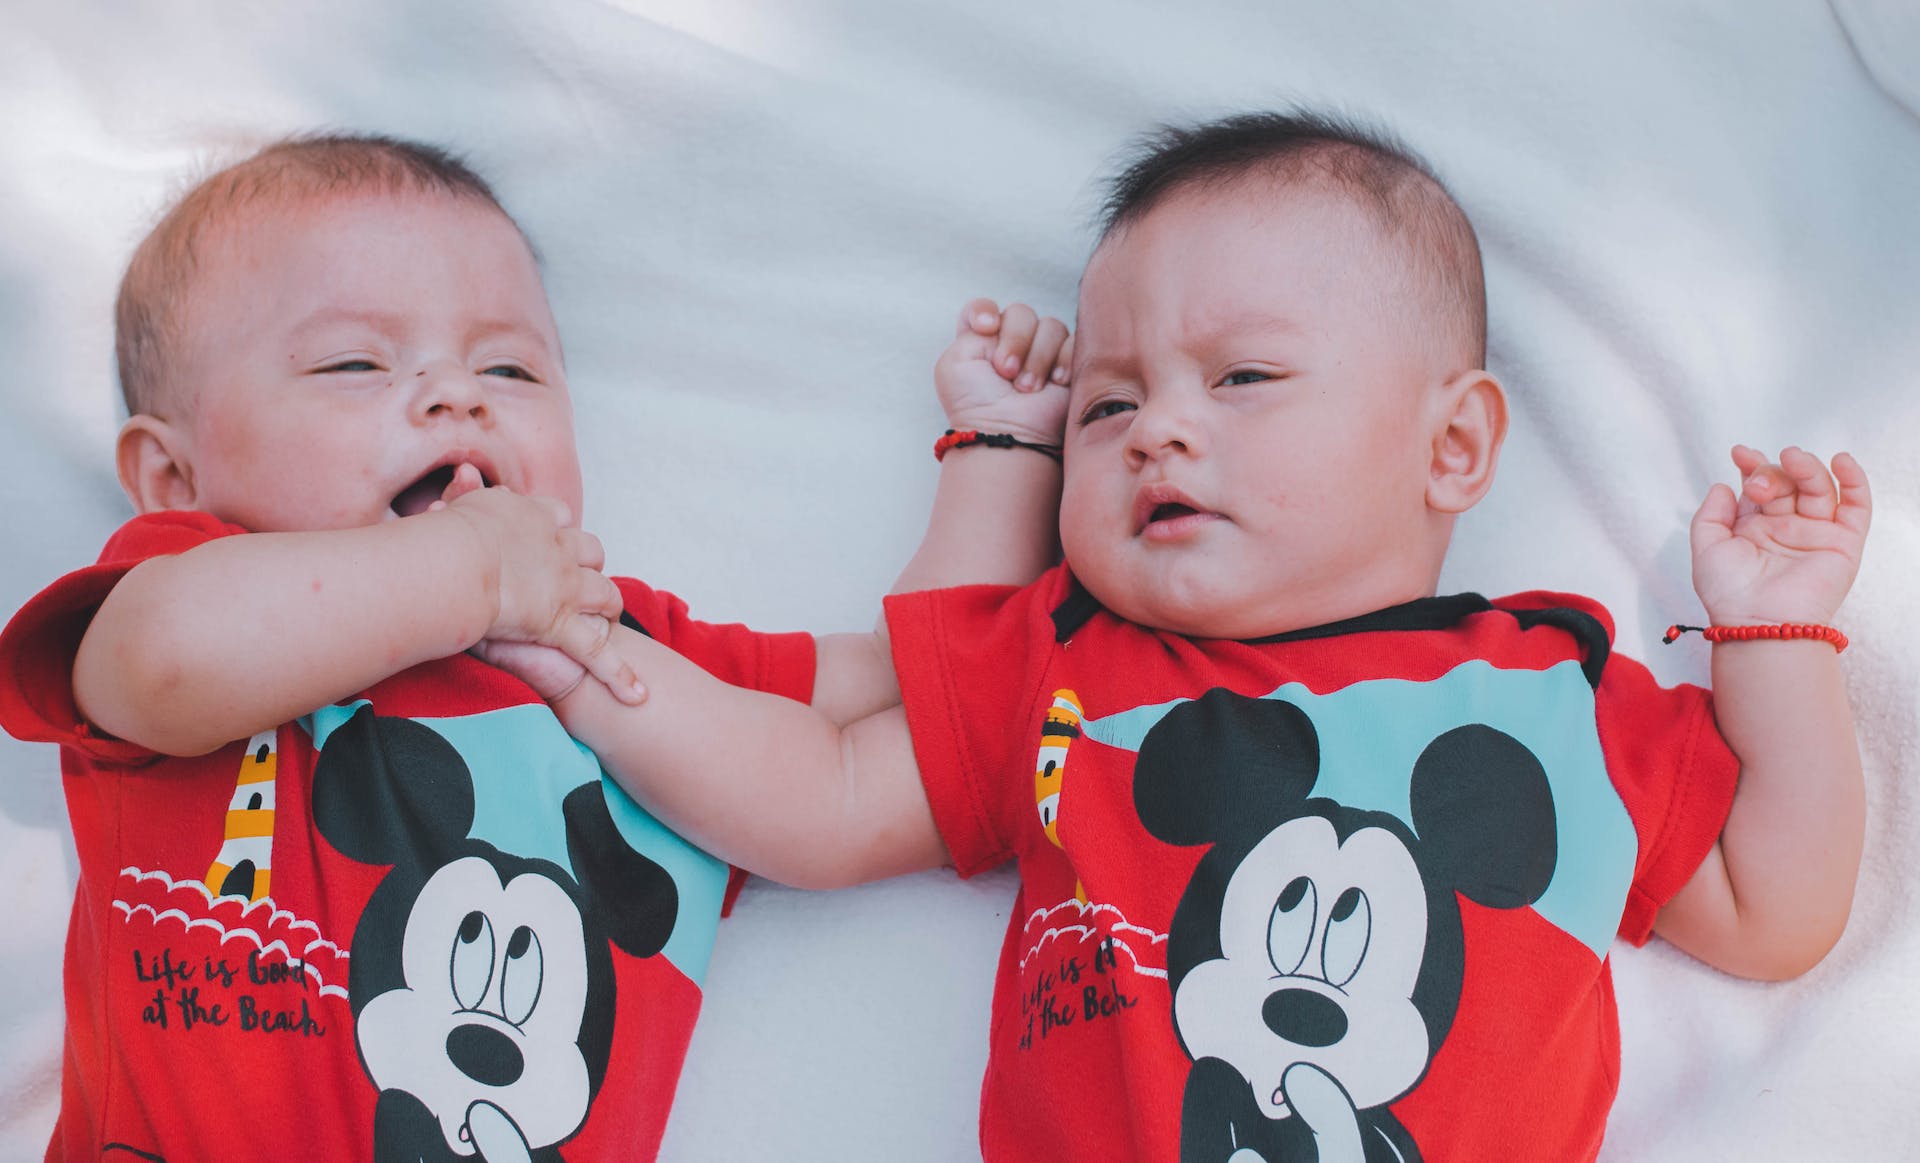 Zwei Babys in roten Mickey Mouse-Shirts | Quelle: Pexels